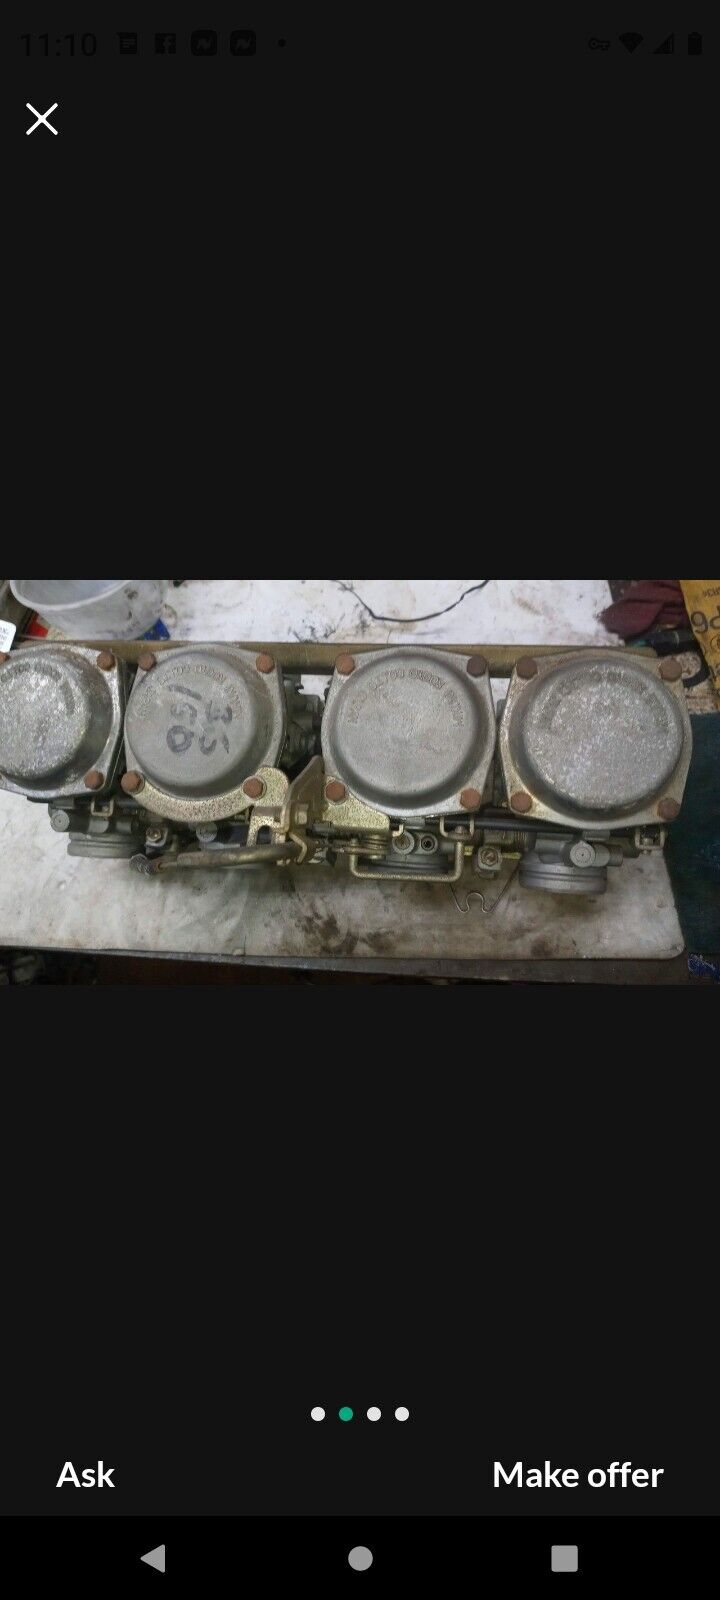 SOLD SOLD Suzuki GS1100E GS1100 GS 1100 Carburetors Carbs pretty clean been in garage for 35 years